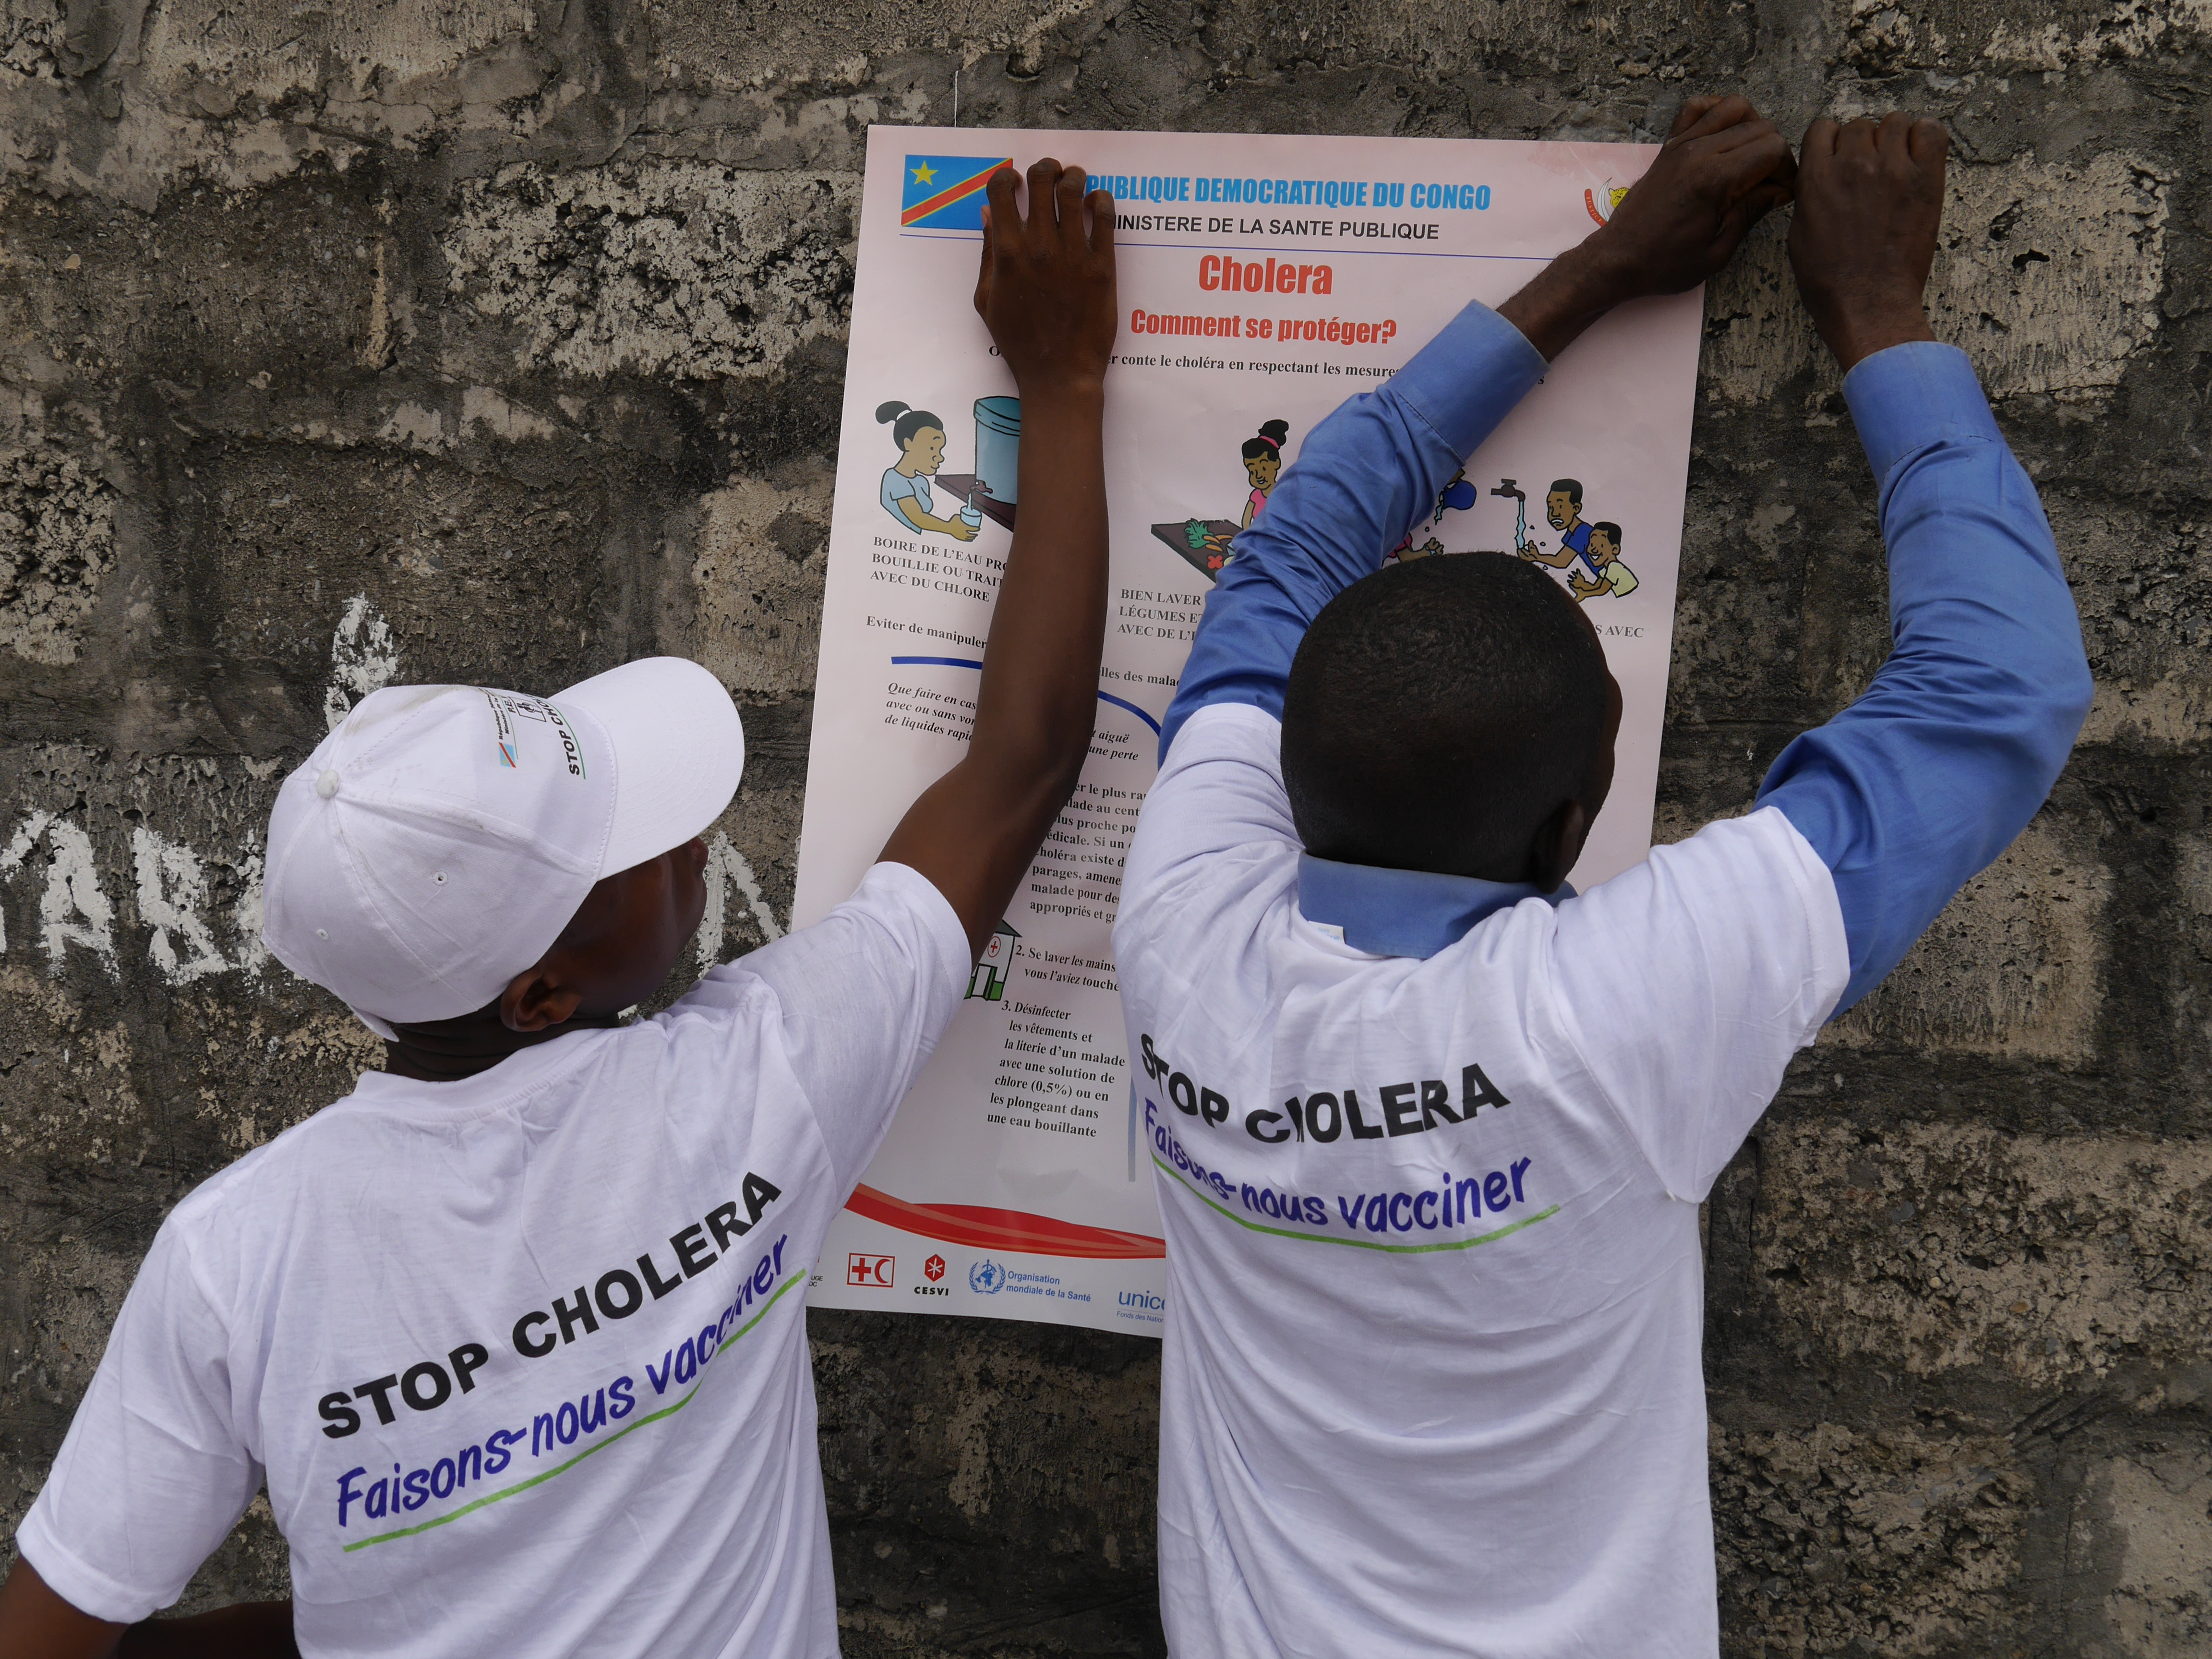 Health workers put up a poster on preventing cholera during an outbreak in Kinshasa in 2016. Credit WHO/Eugène Kabambi Kabangu